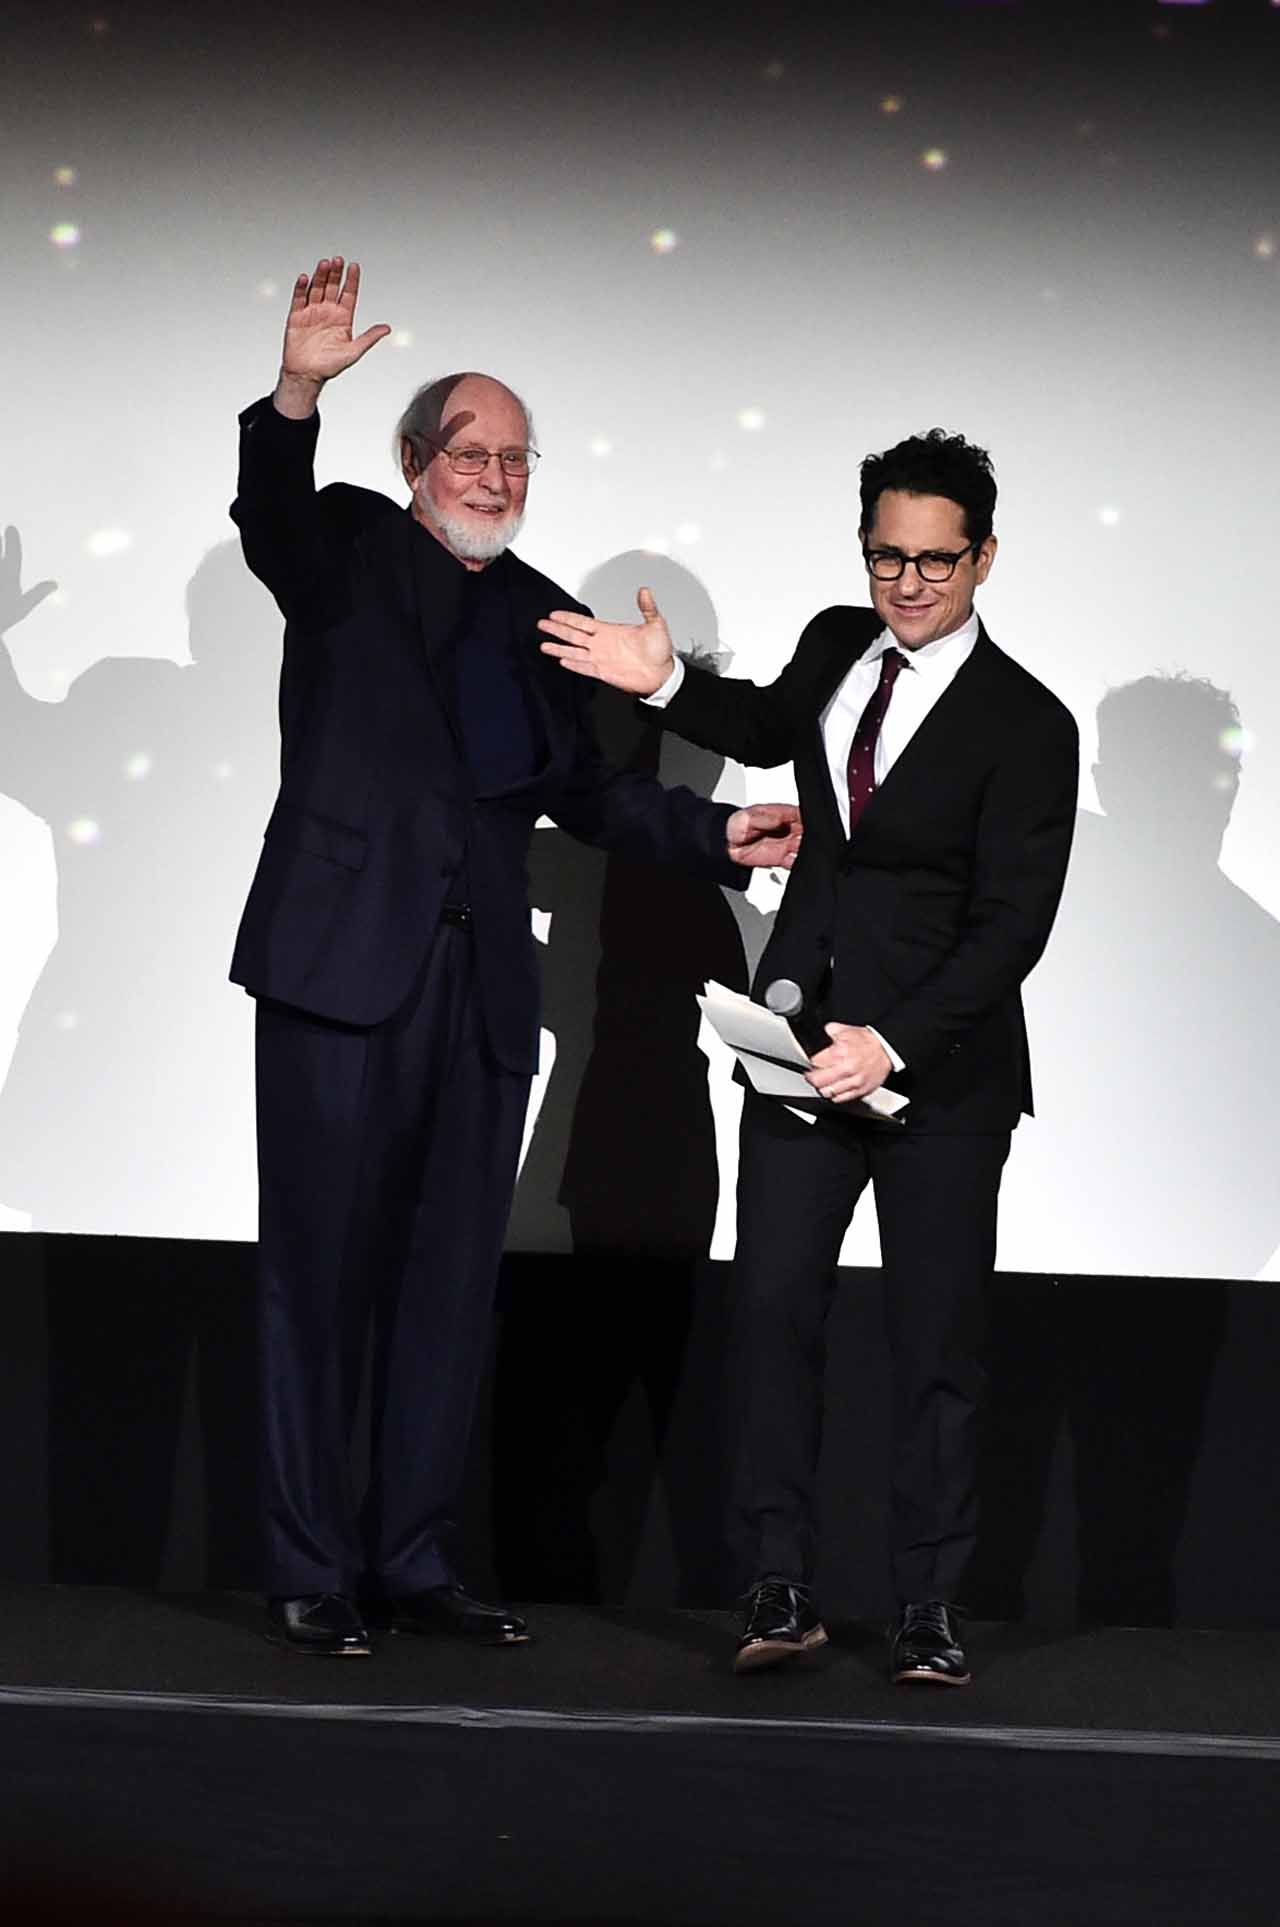 HOLLYWOOD, CA - DECEMBER 14: Composer John Williams (L) and director J.J. Abrams speak onstage during the World Premiere of ?Star Wars: The Force Awakens? at the Dolby, El Capitan, and TCL Theatres on December 14, 2015 in Hollywood, California.  (Photo by Alberto E. Rodriguez/Getty Images for Disney) *** Local Caption *** John Williams;J.J. Abrams